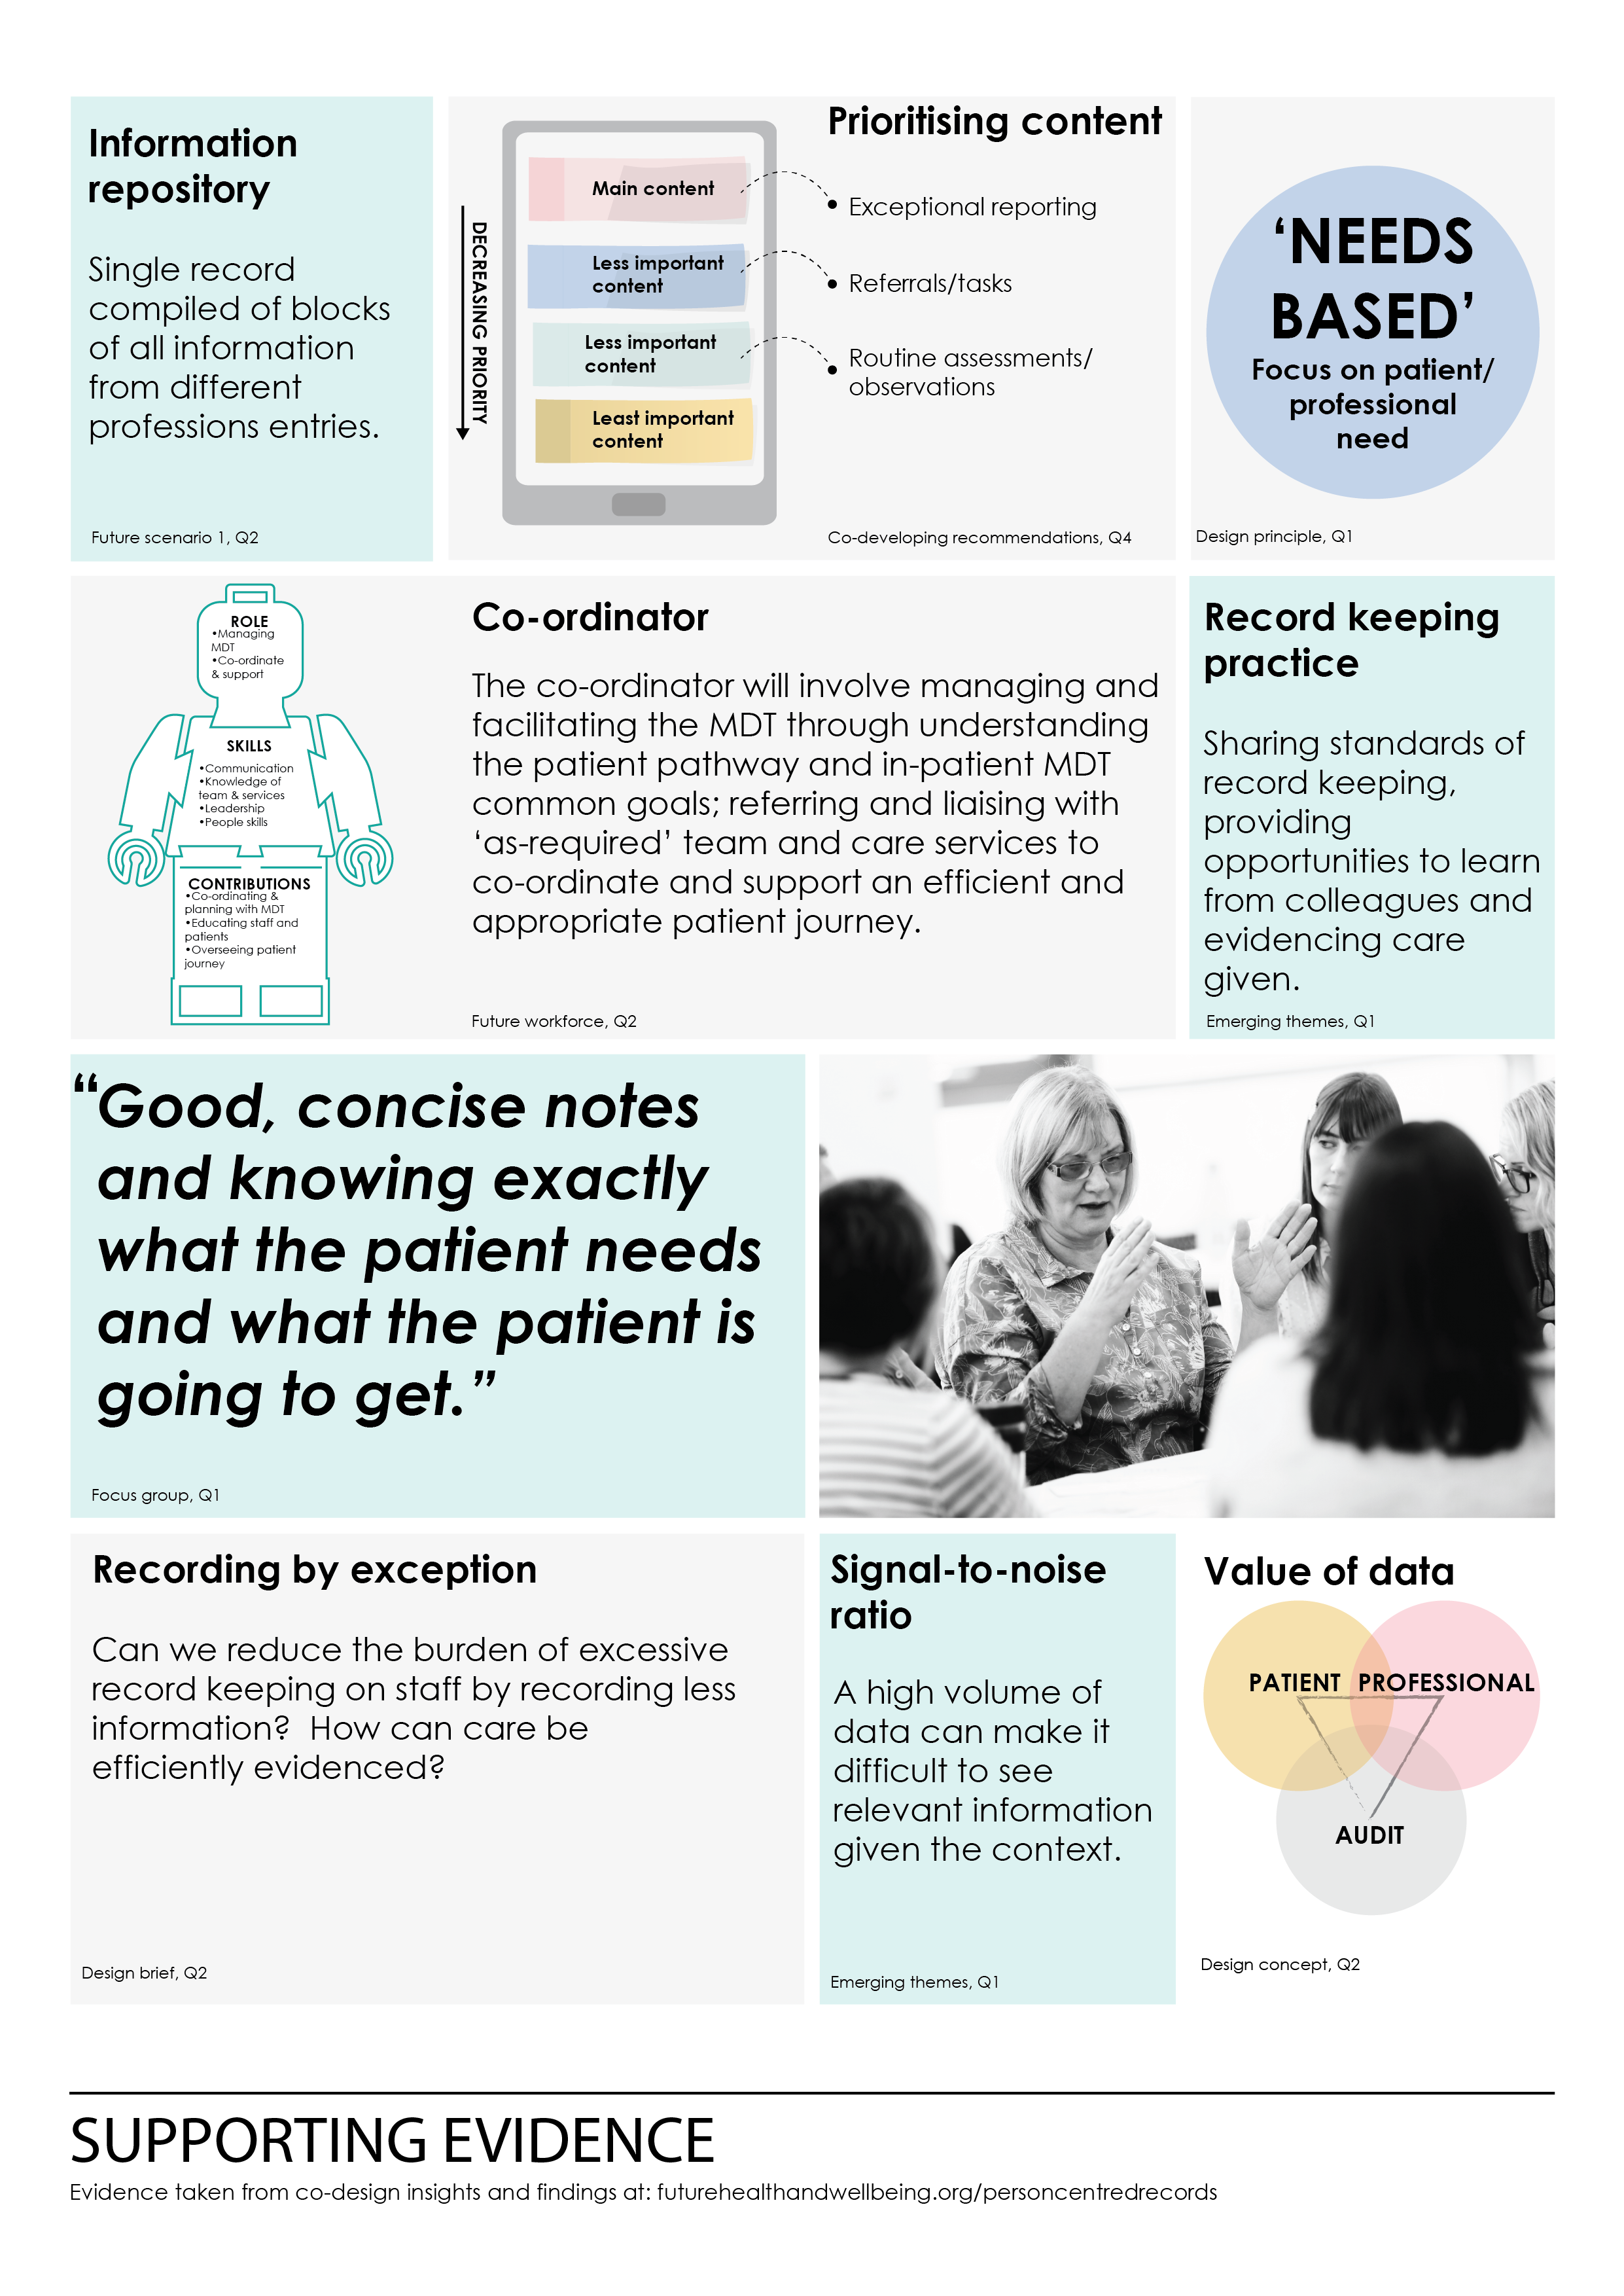 recommendations and evidence_evidencing care2.png